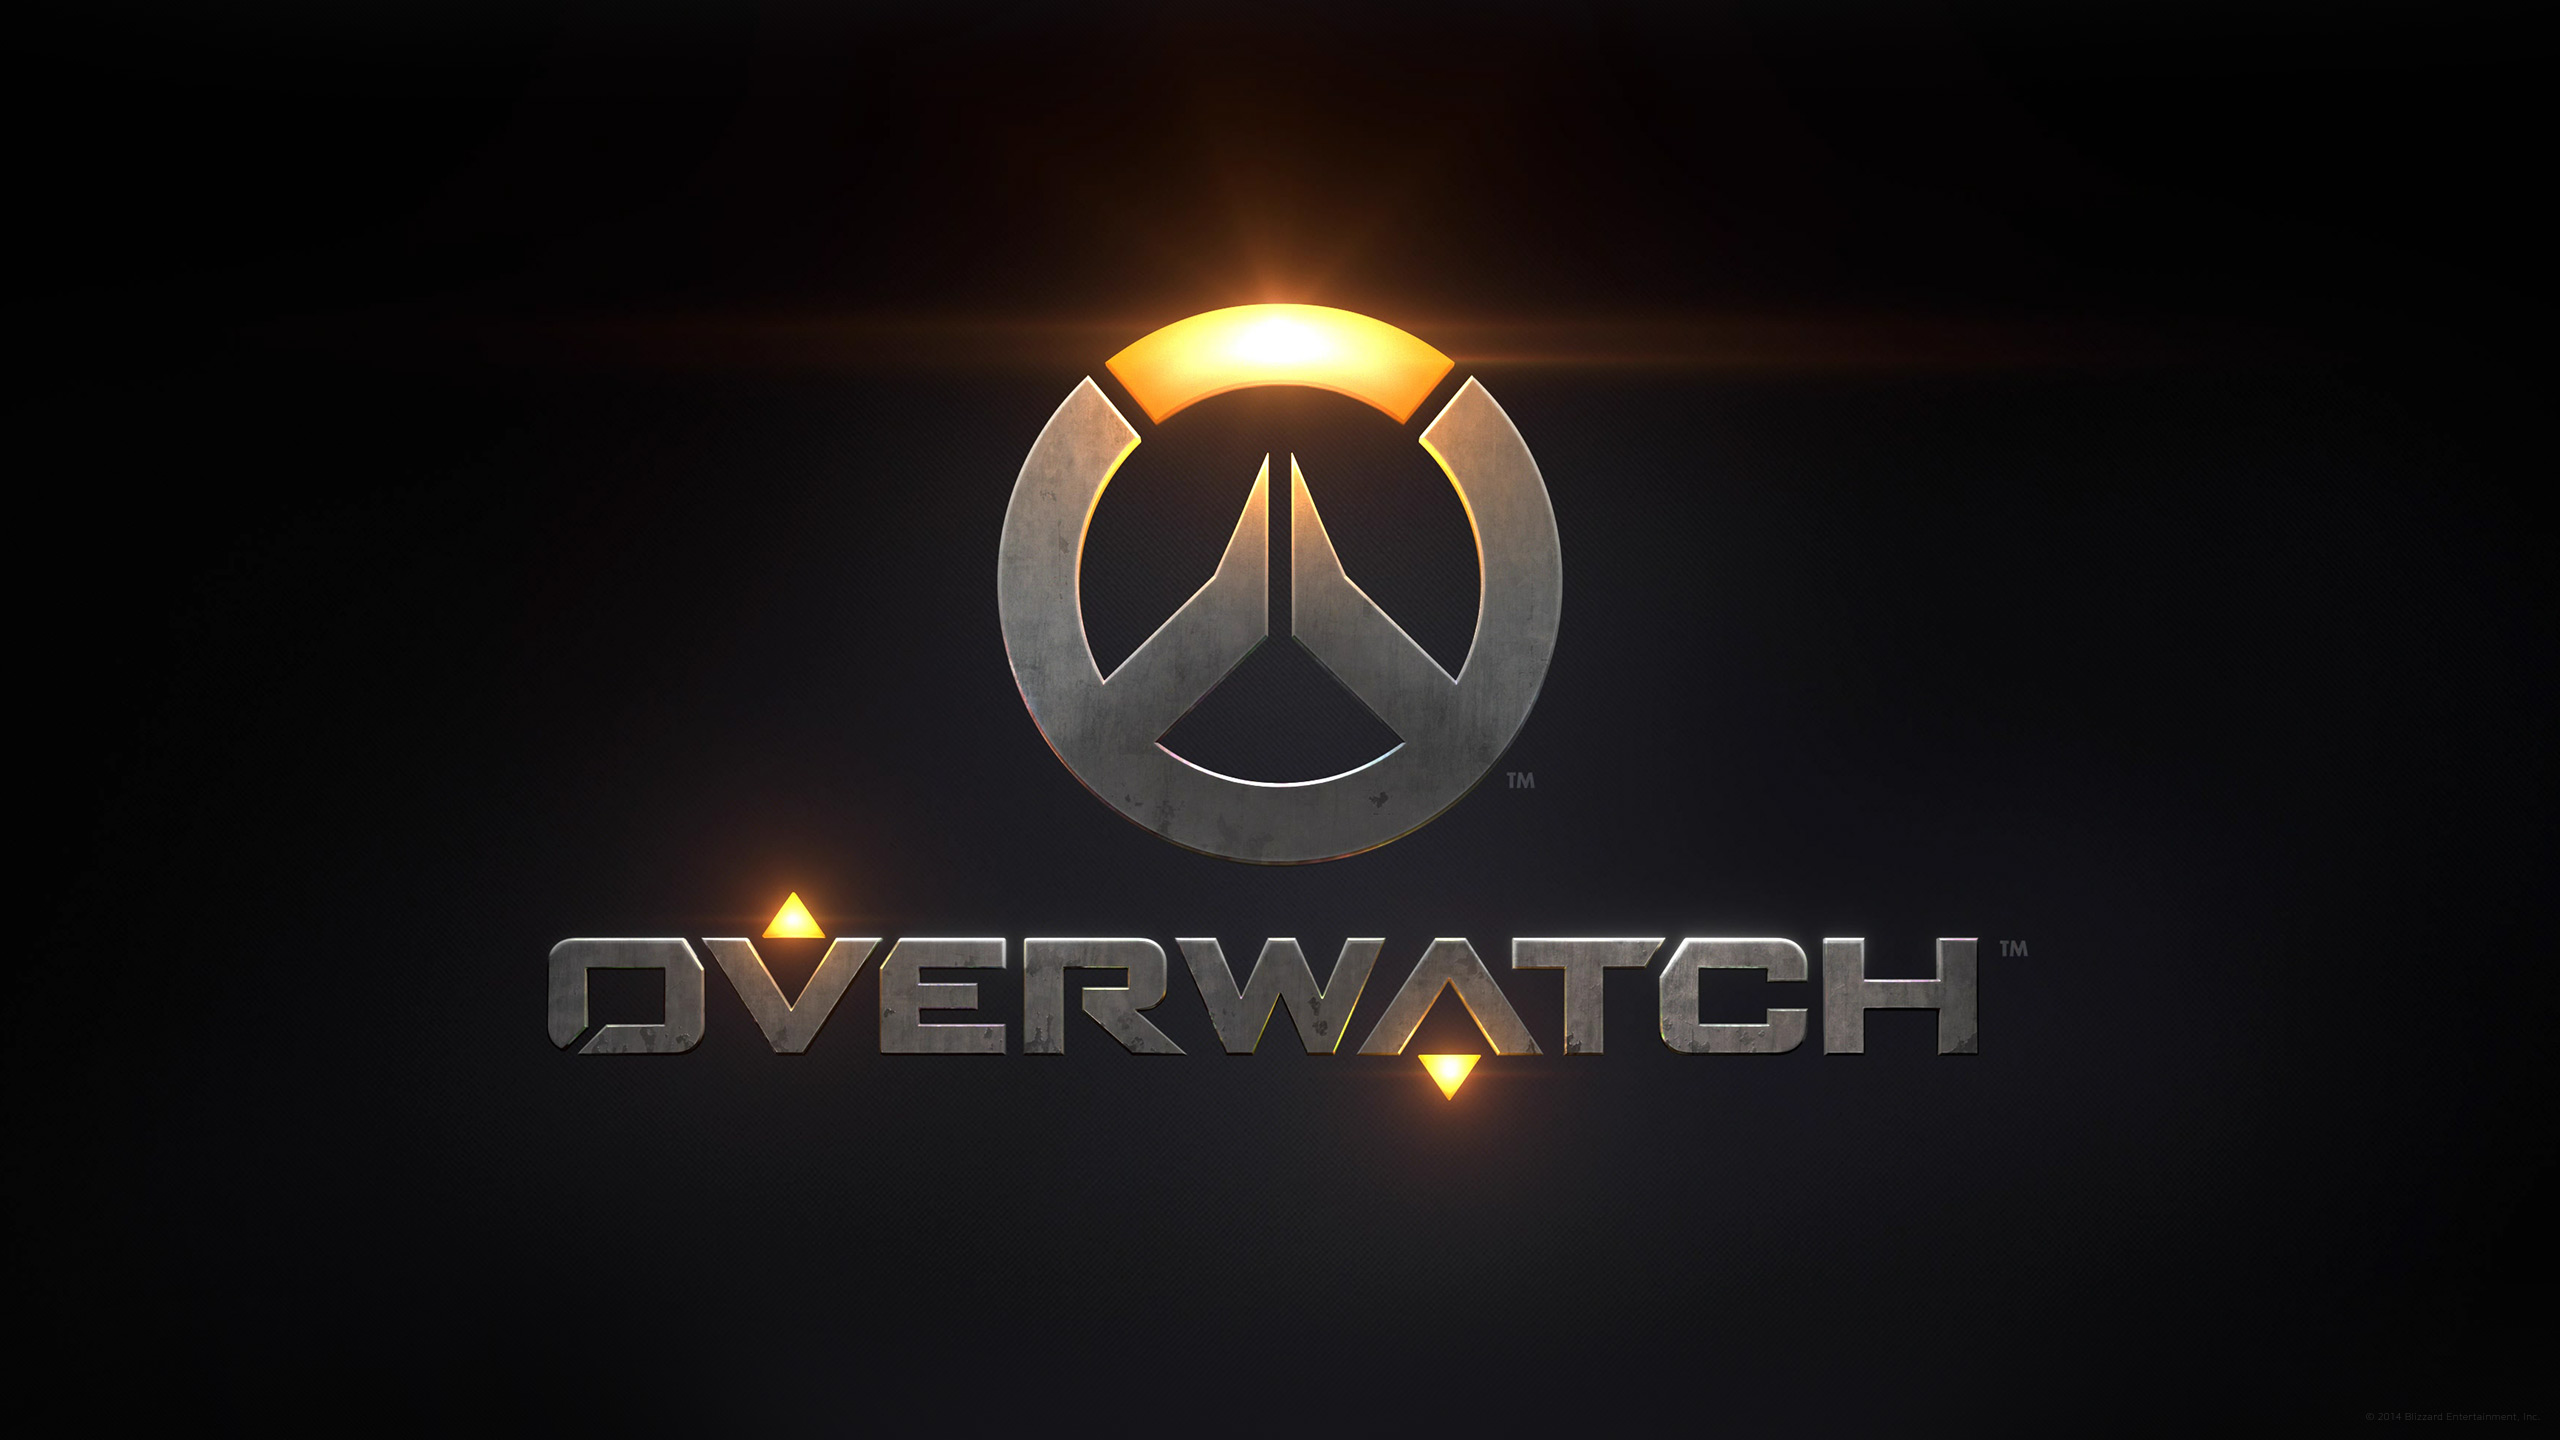 The Best Overwatch Official Wallpapers Choose Your Hero and Fight for